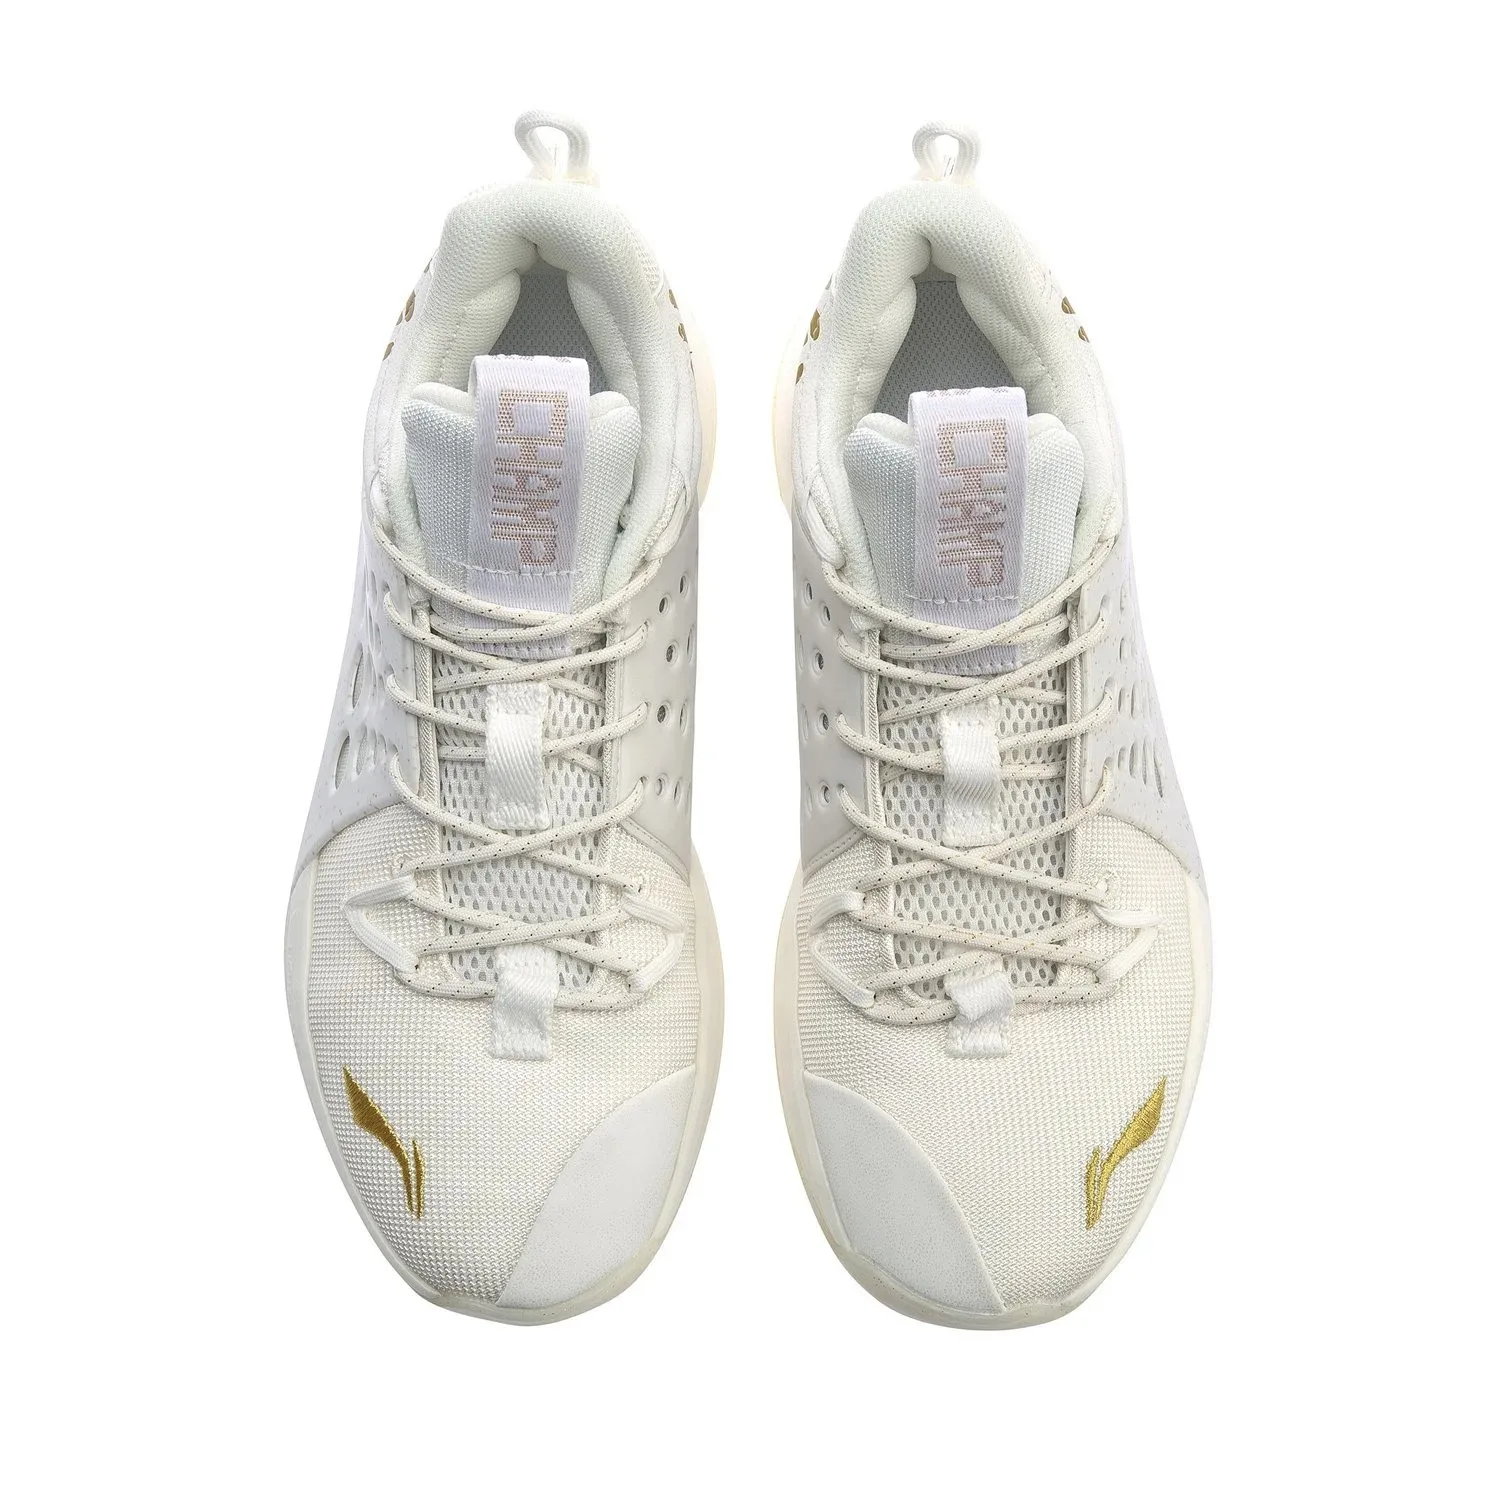 

Lining CHEAP Breathable LINING BASKETBALL SHOES WITH HIGH CLICKS